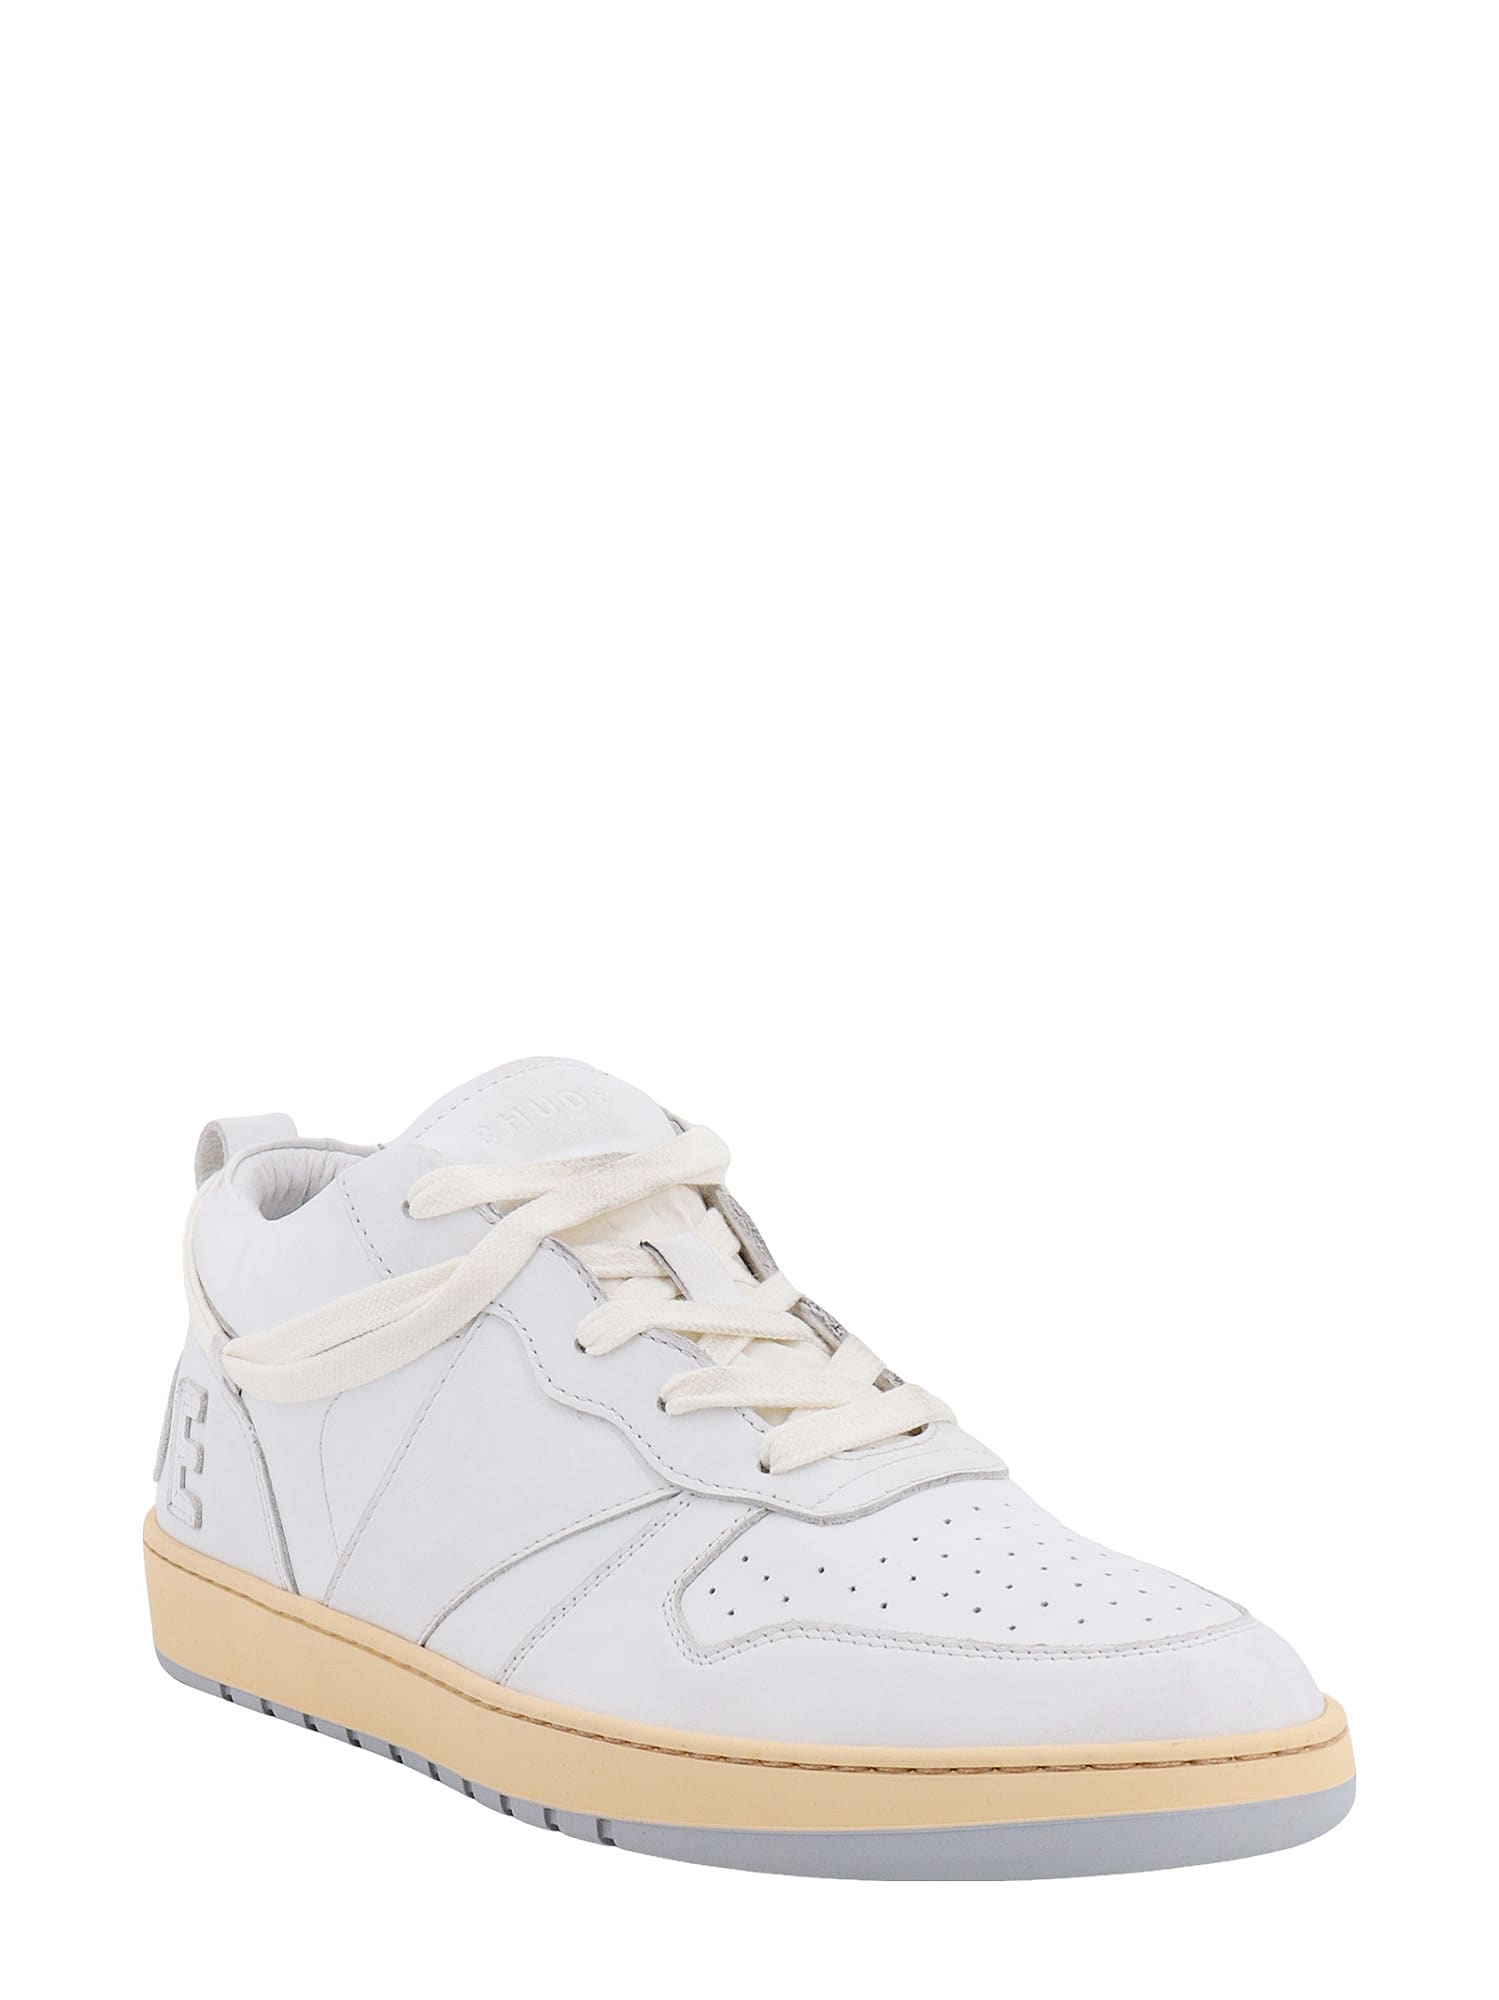 Shop Rhude Rhecess Low Sneakers In White